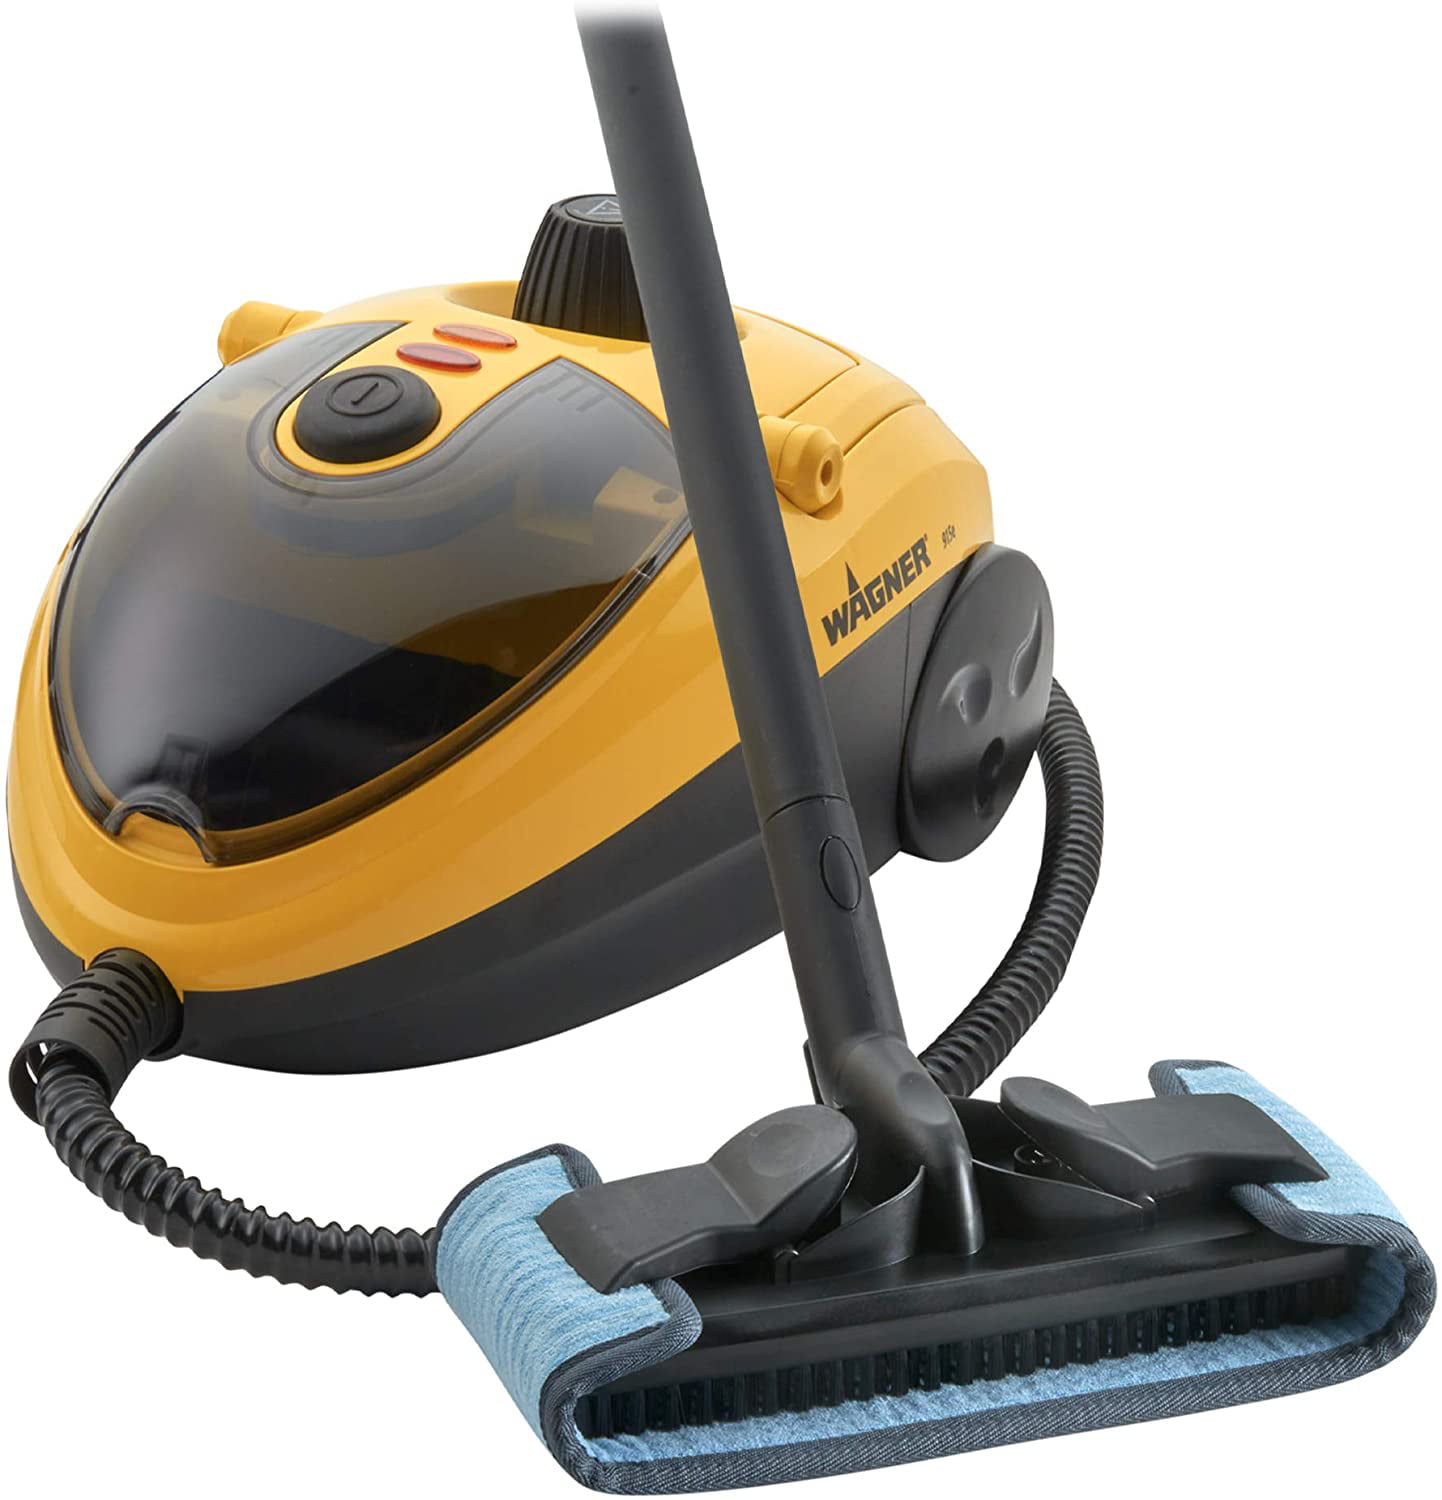 NEW! Wagner 915e Power Steamer for Steam Cleaning and Wallpaper Stripping 